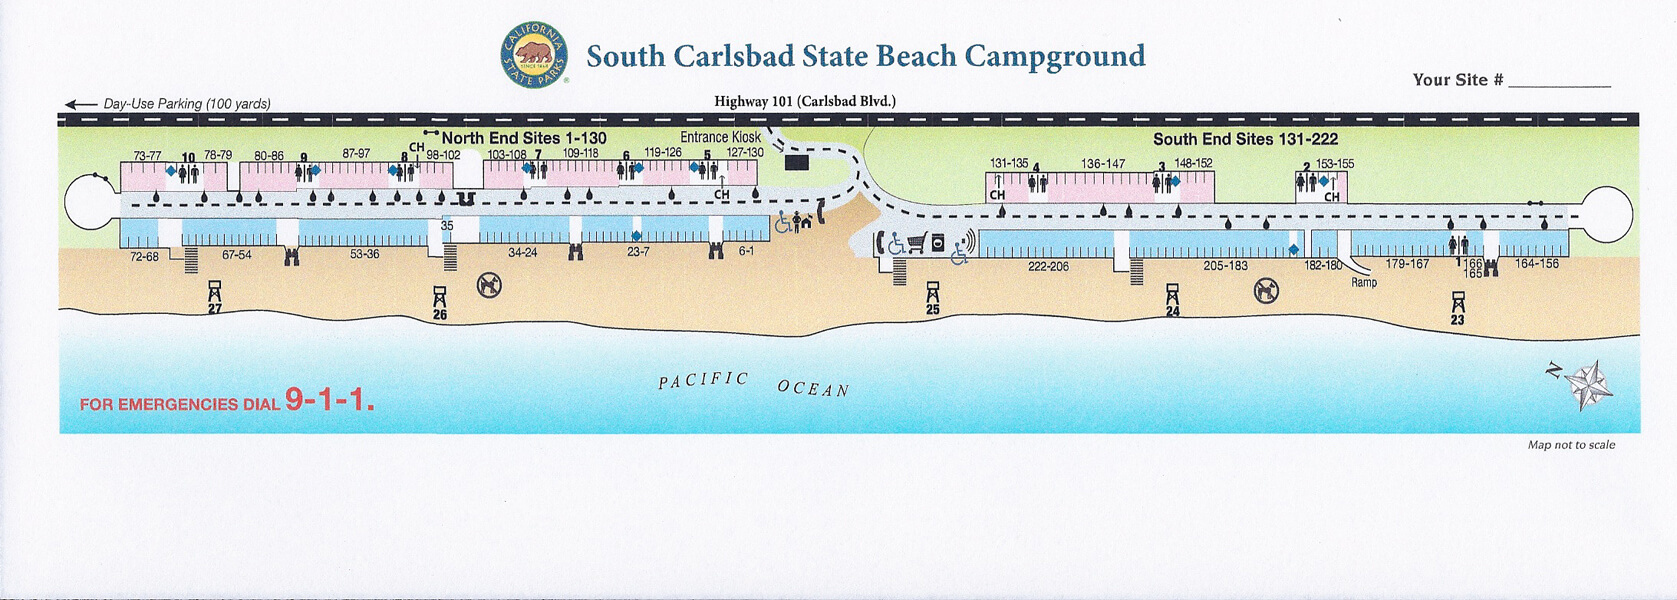 South Carlsbad State Beach Campsite Photos Info Reservations